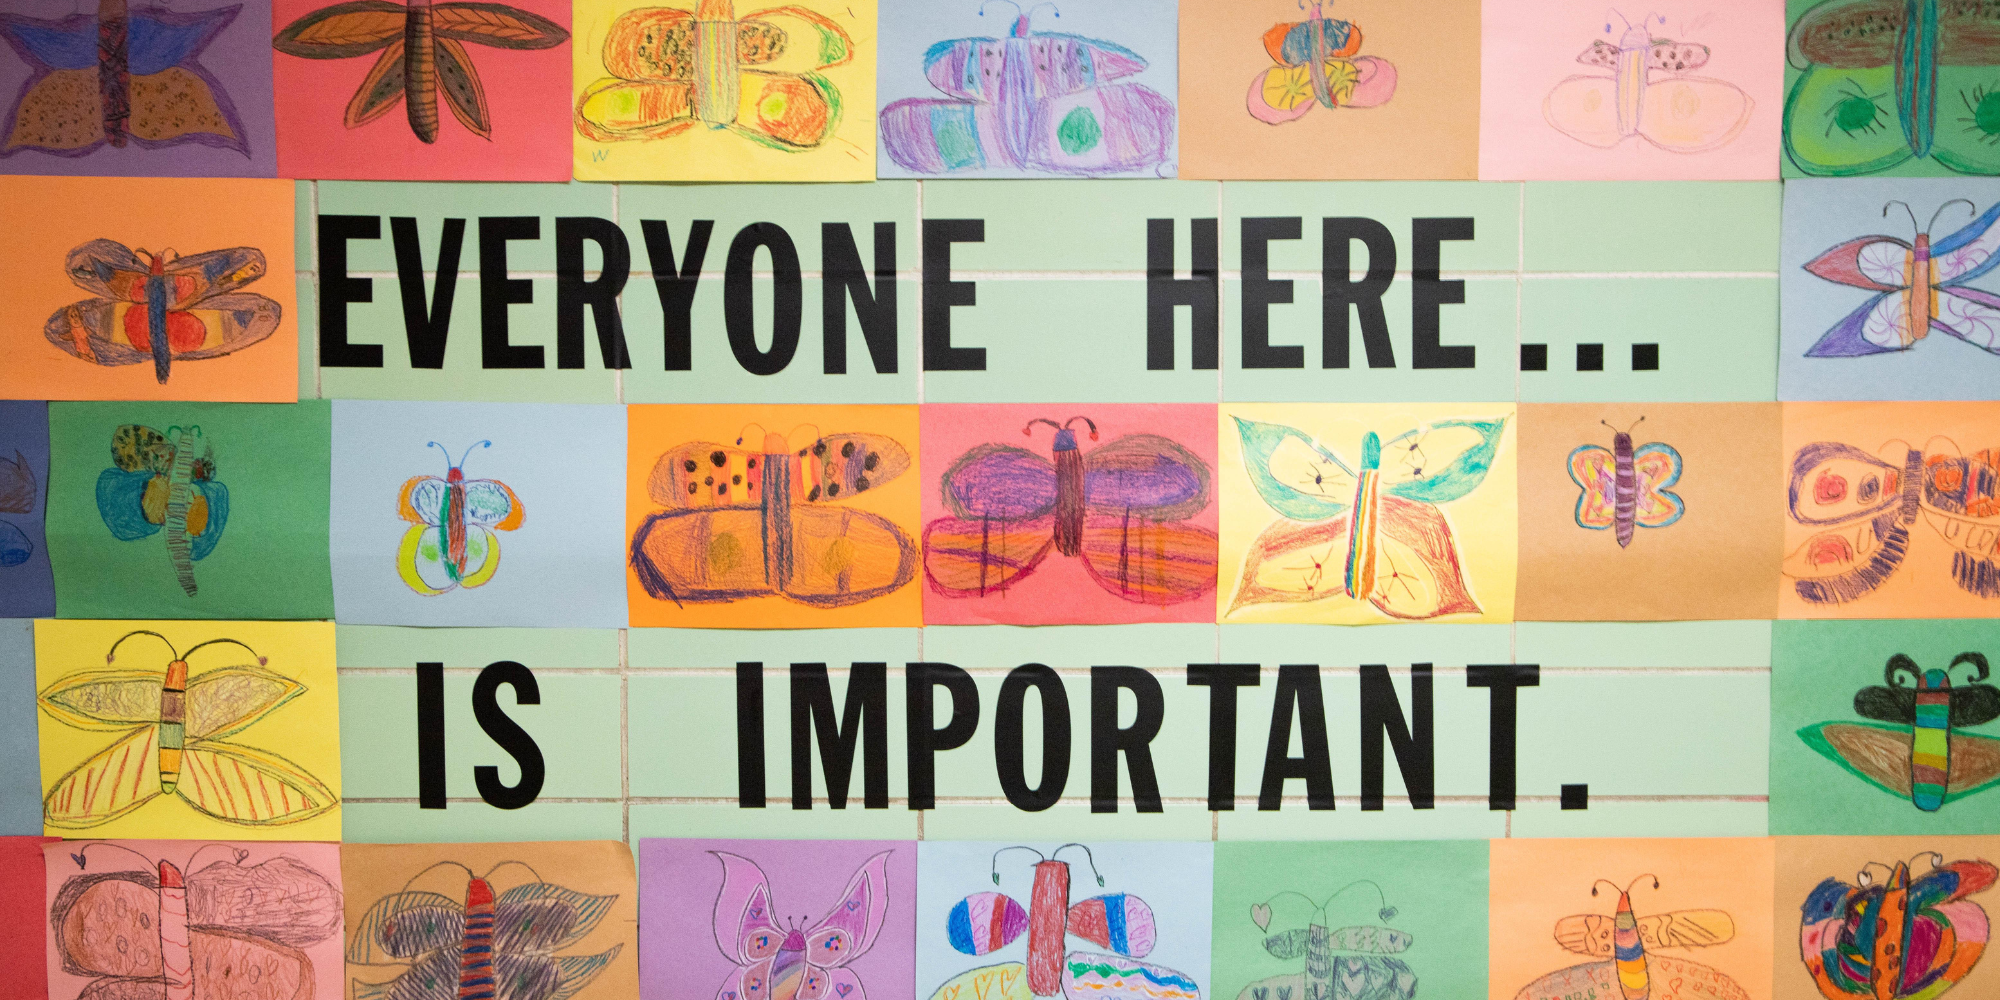 On a green school wall, large black text reads “EVERYONE HERE IS IMPORTANT.” The words are surrounded by colorful pictures of butterflies drawn by students. Messages like these are important for students to hear during LGBTQ Pride Month and all year long.